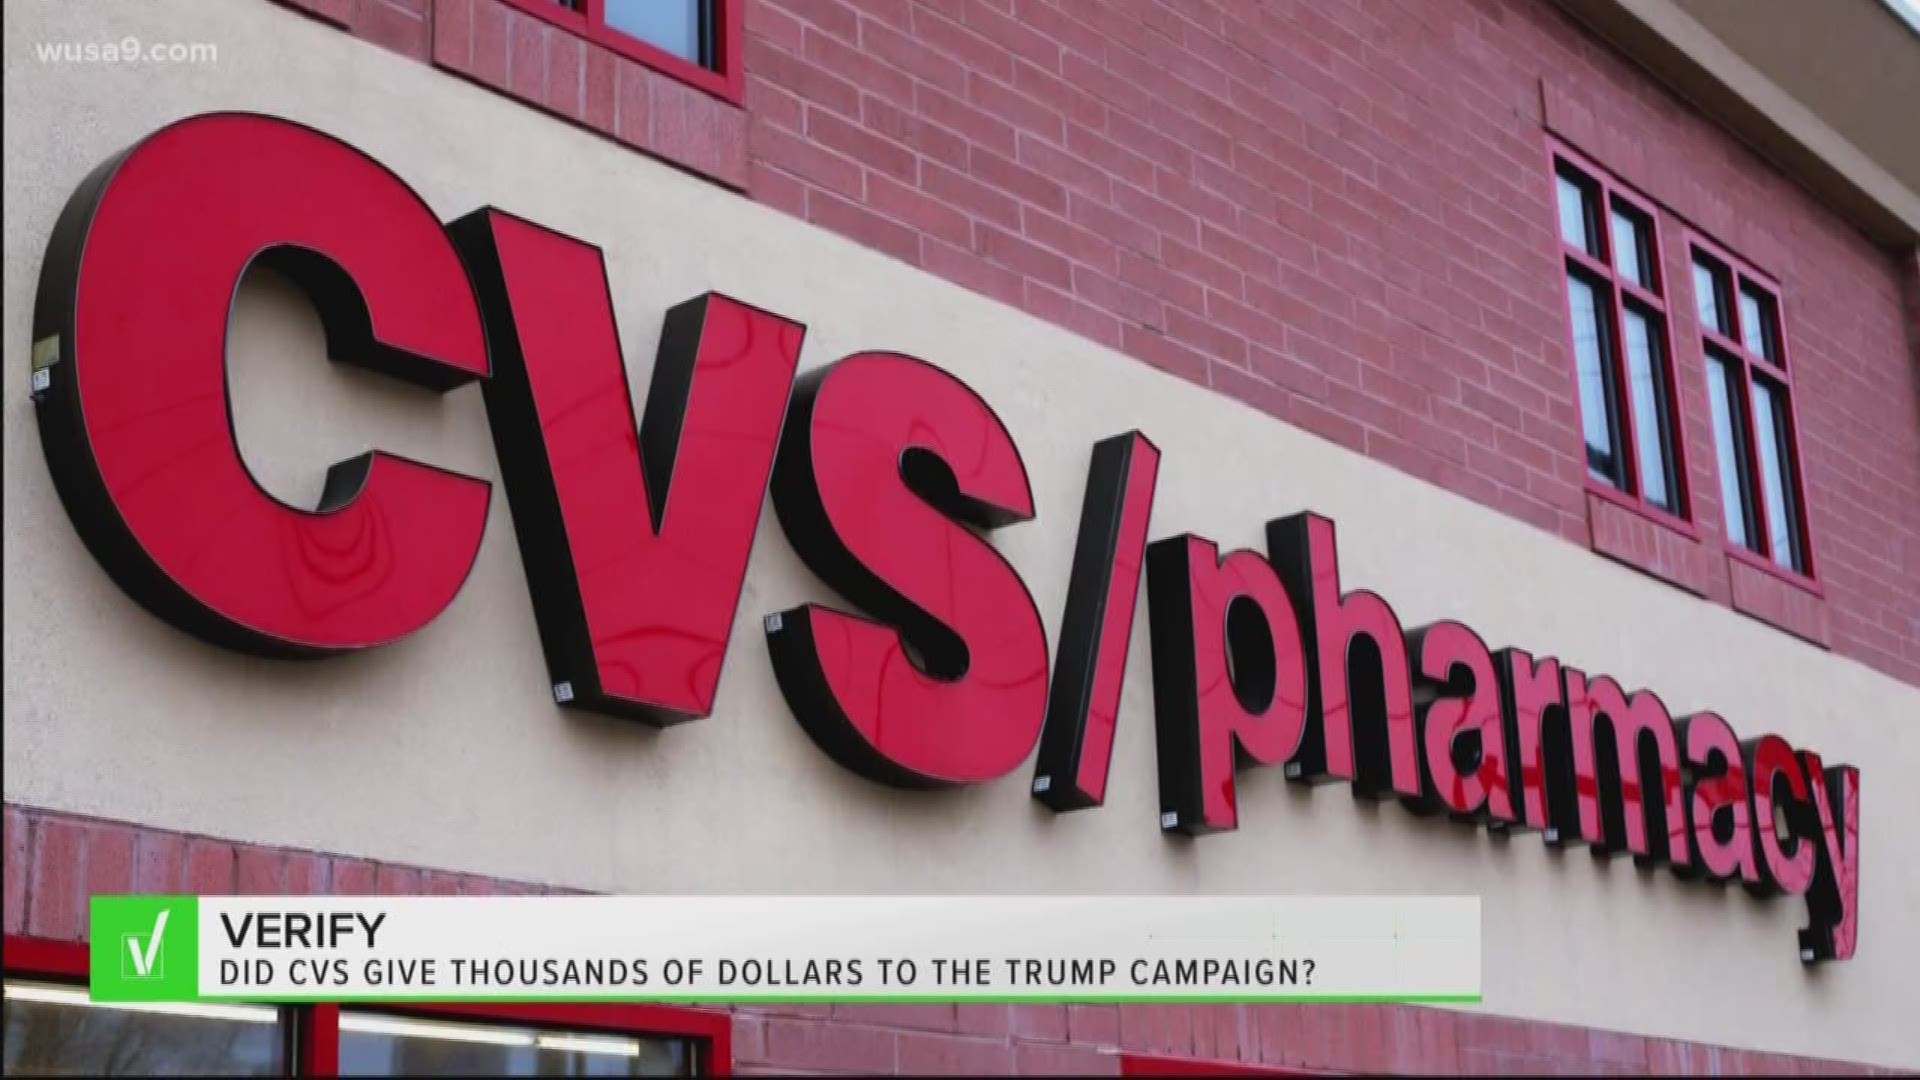 A viewer asked the Verify team to get to the bottom of a rumor she heard about pharmacy giant, CVS, donating thousands of dollars to the Trump campaign.